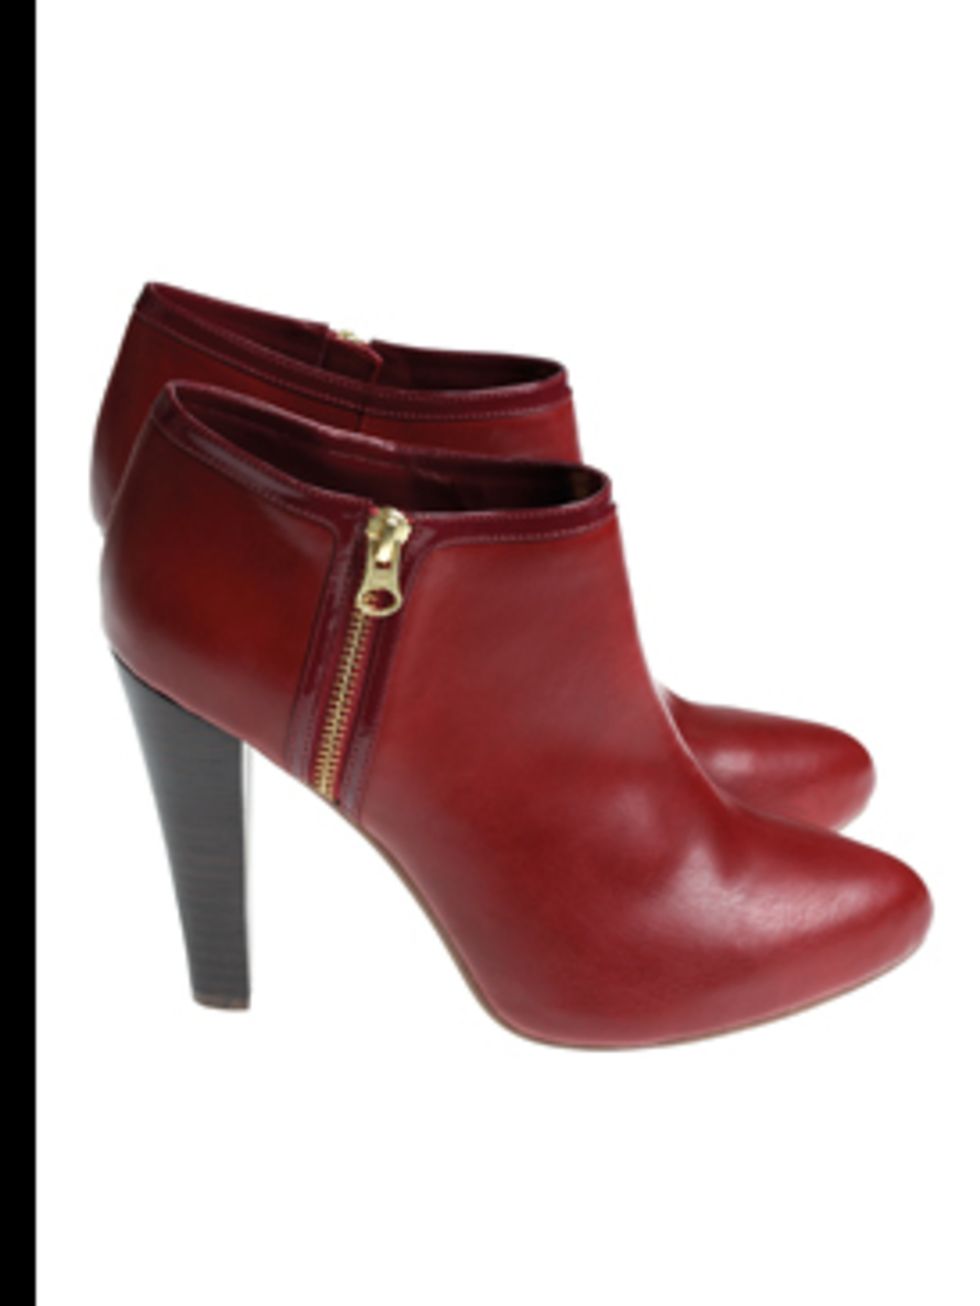 <p>Ankle Boots, £29.99 by <a href="http://www.hm.com/gb/">H&amp;M</a></p>